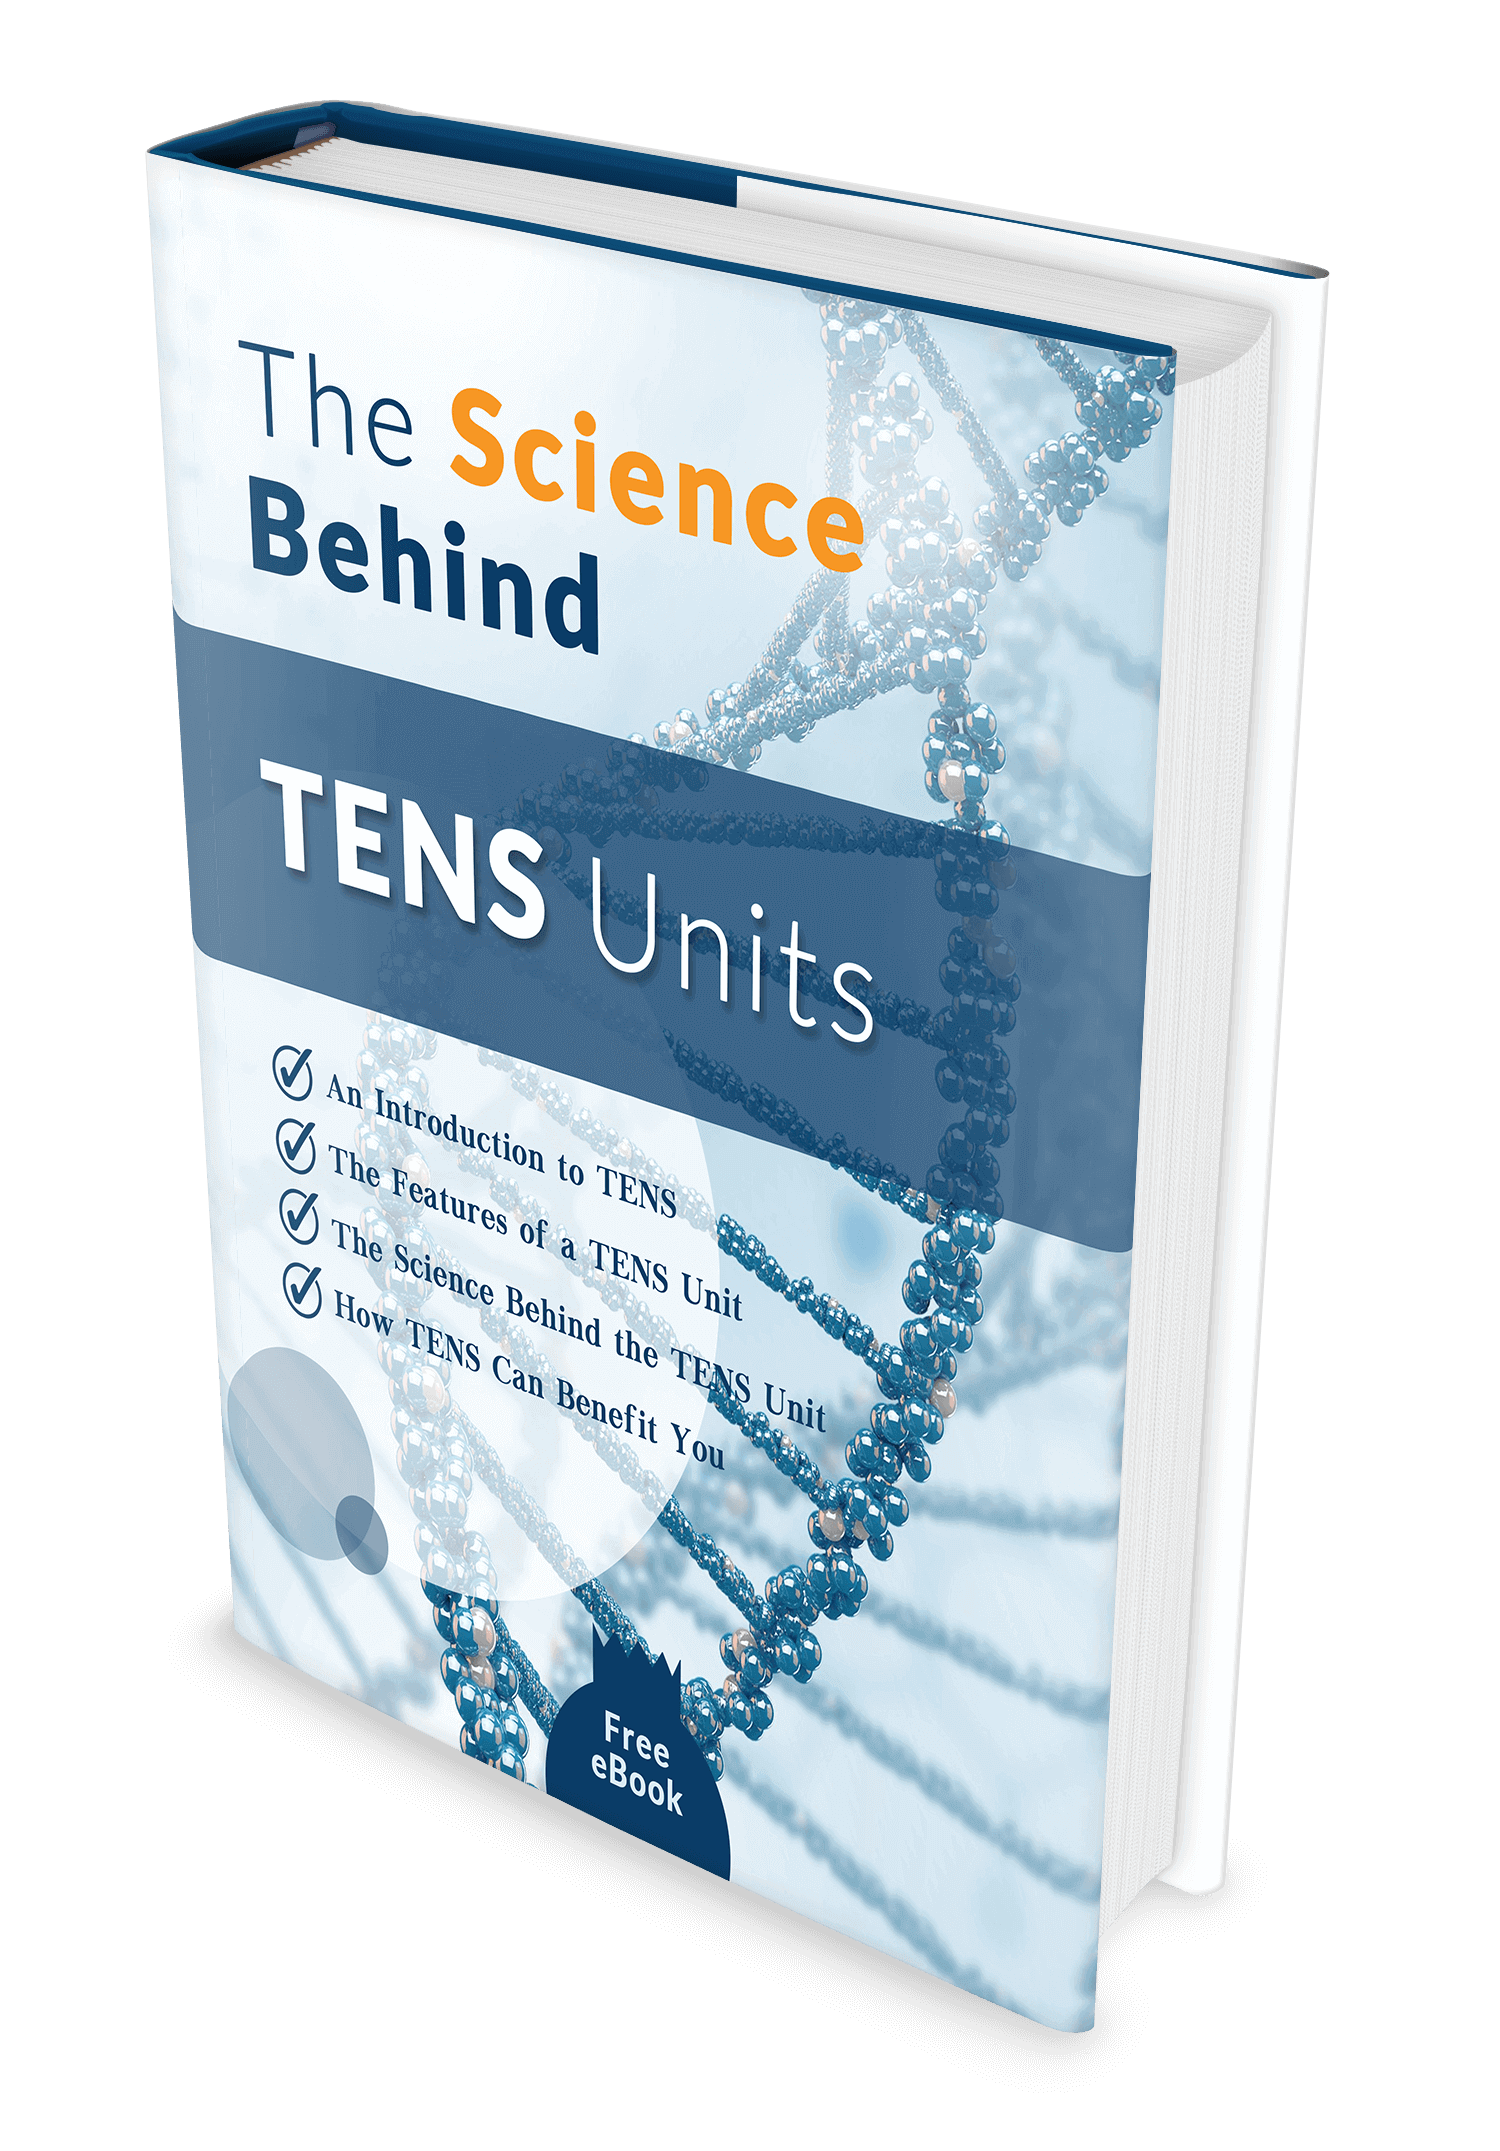 The Science Behind TENS Units